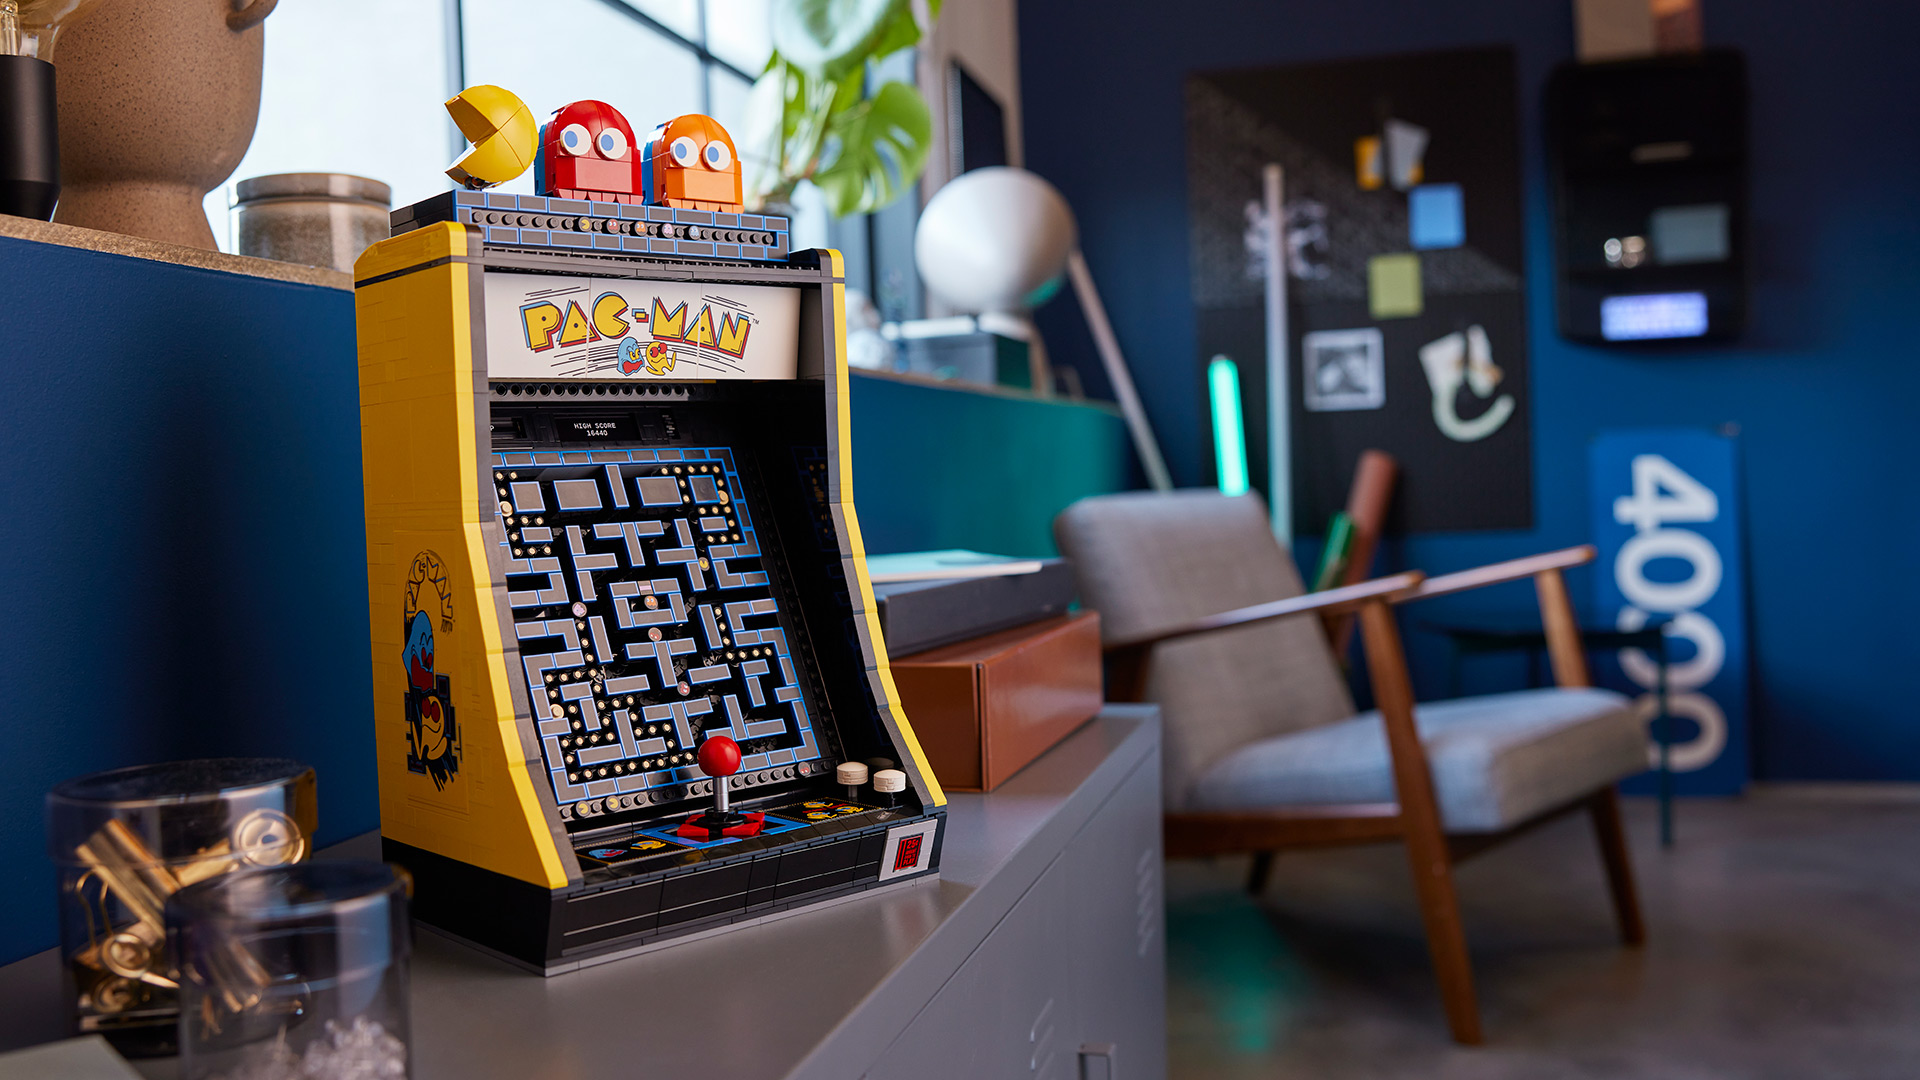 The LEGO PAC-MAN Arcade set will be available to the public June 4, 2023